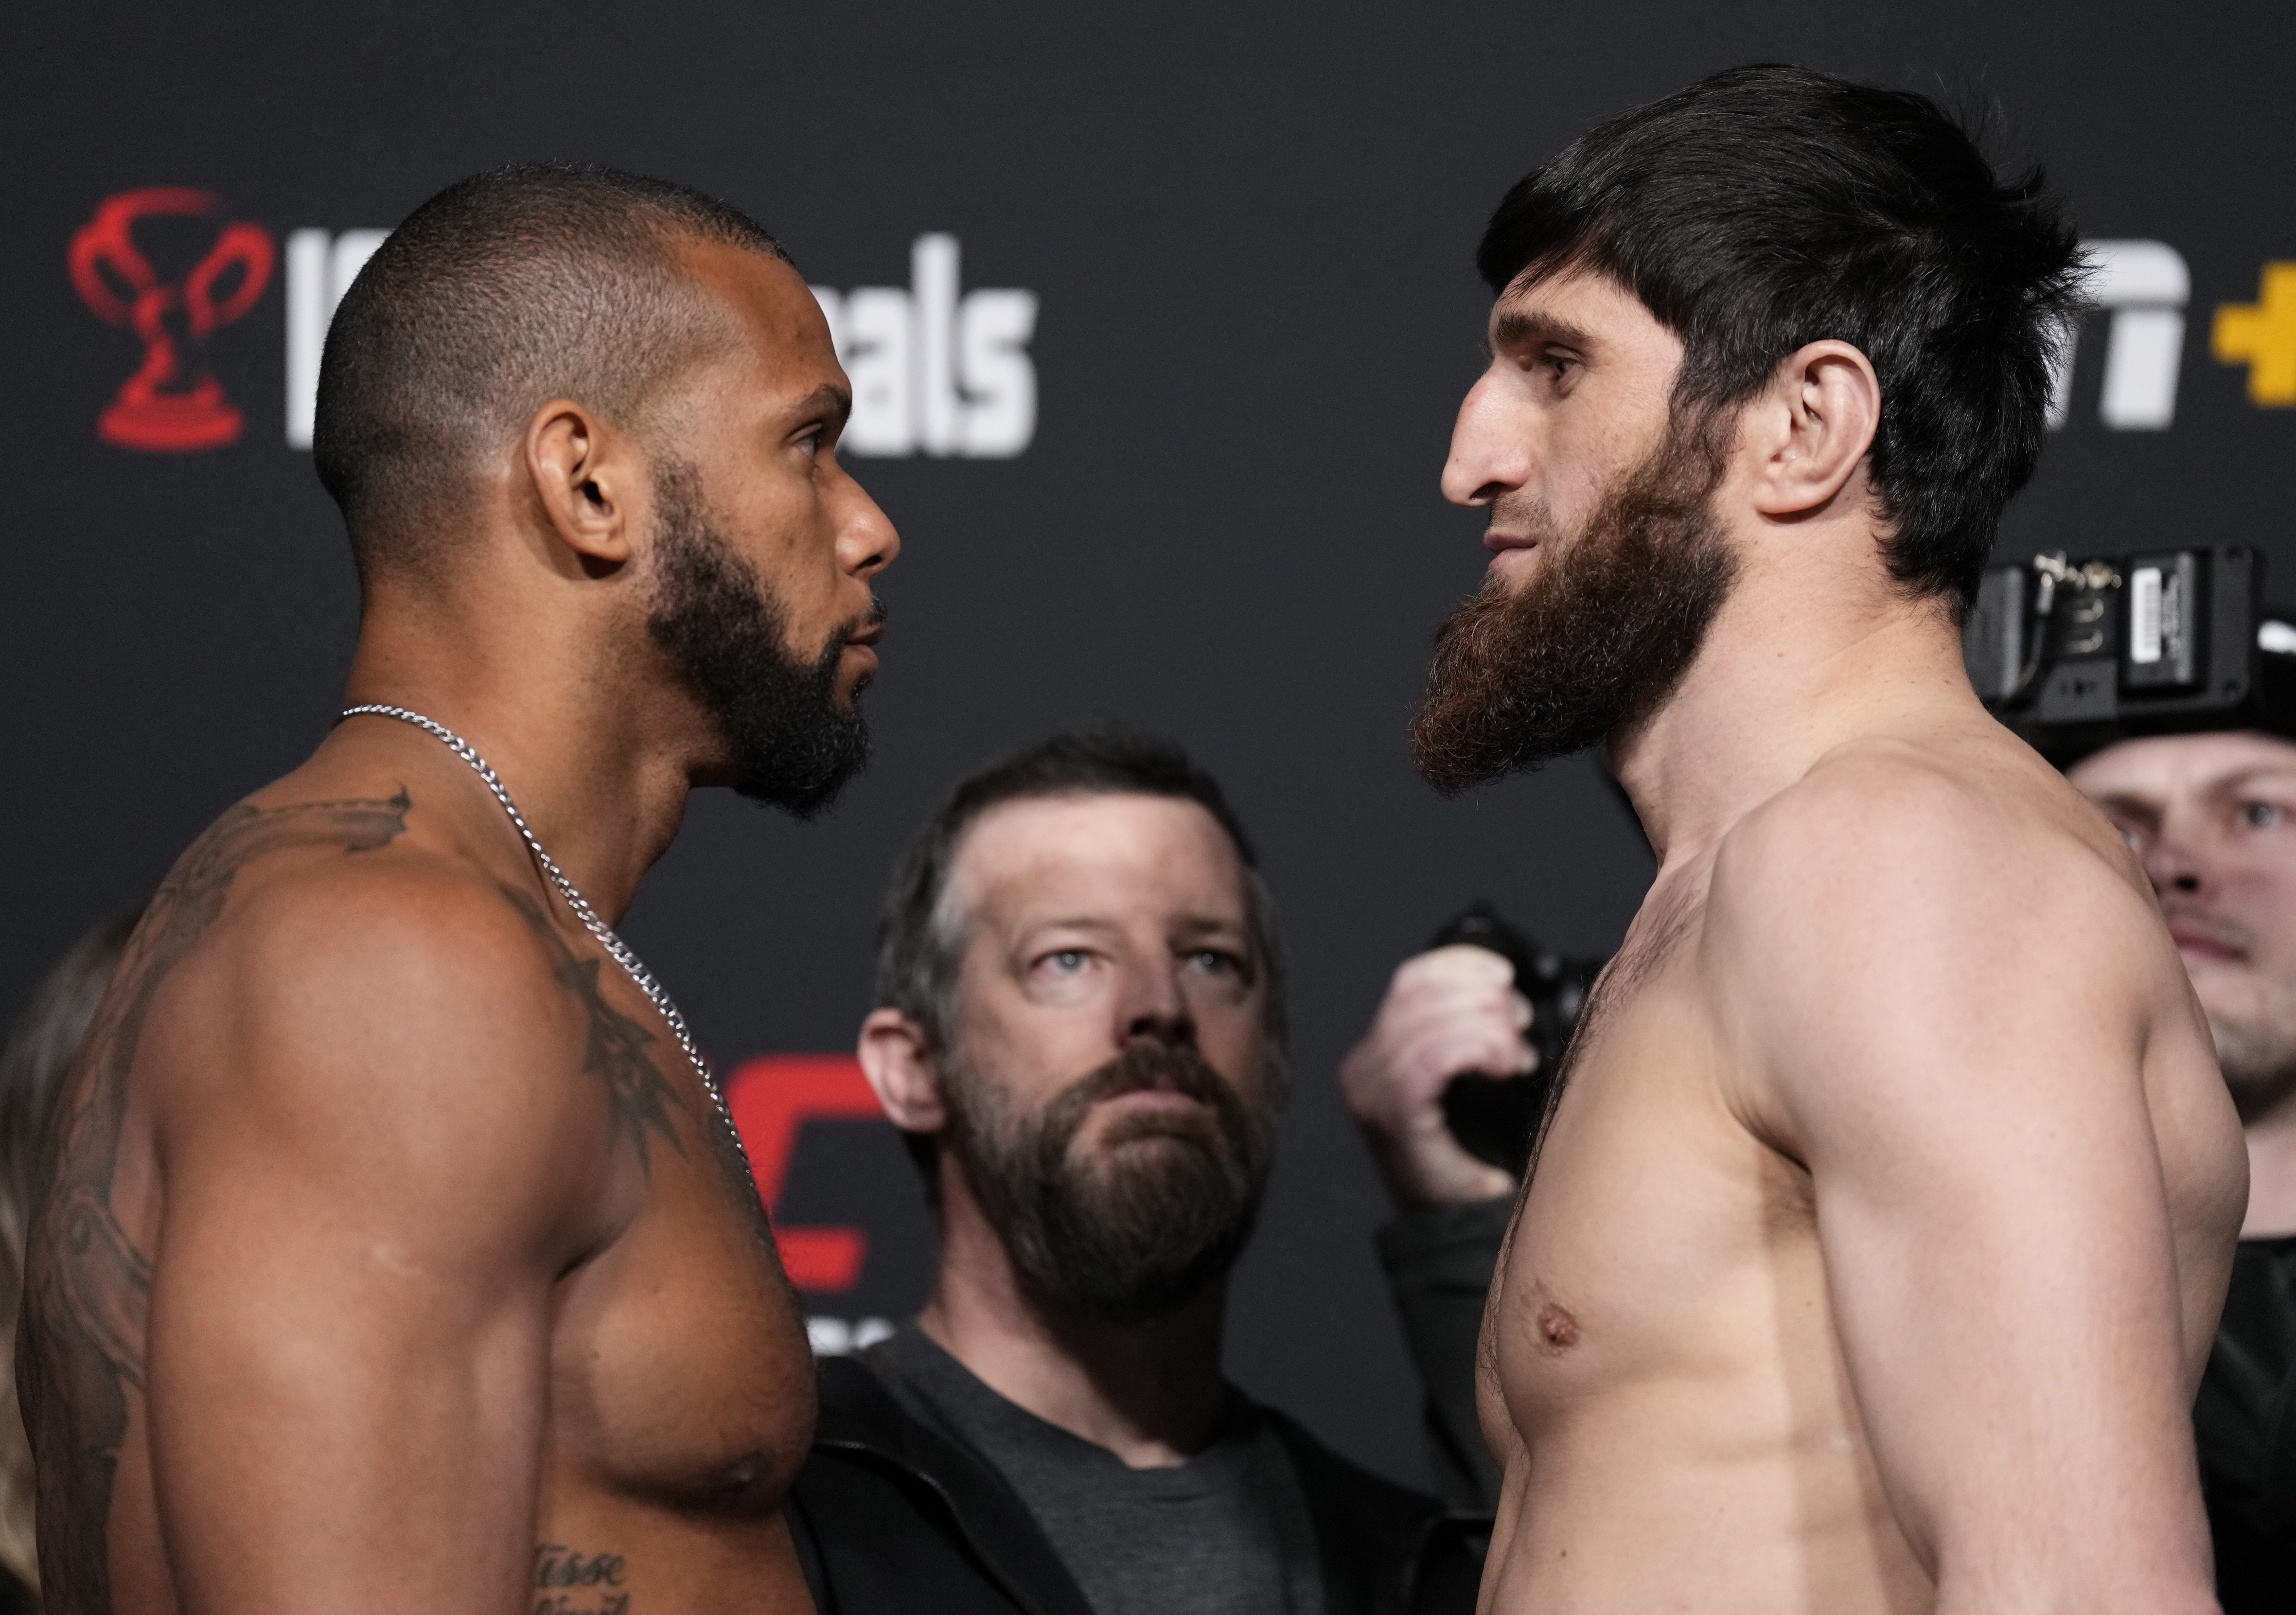 Thiago Santos and Magomed Ankalaev face off during the UFC Fight Night weigh-in at UFC APEX on March 11, 2022 in Las Vegas, Nevada.